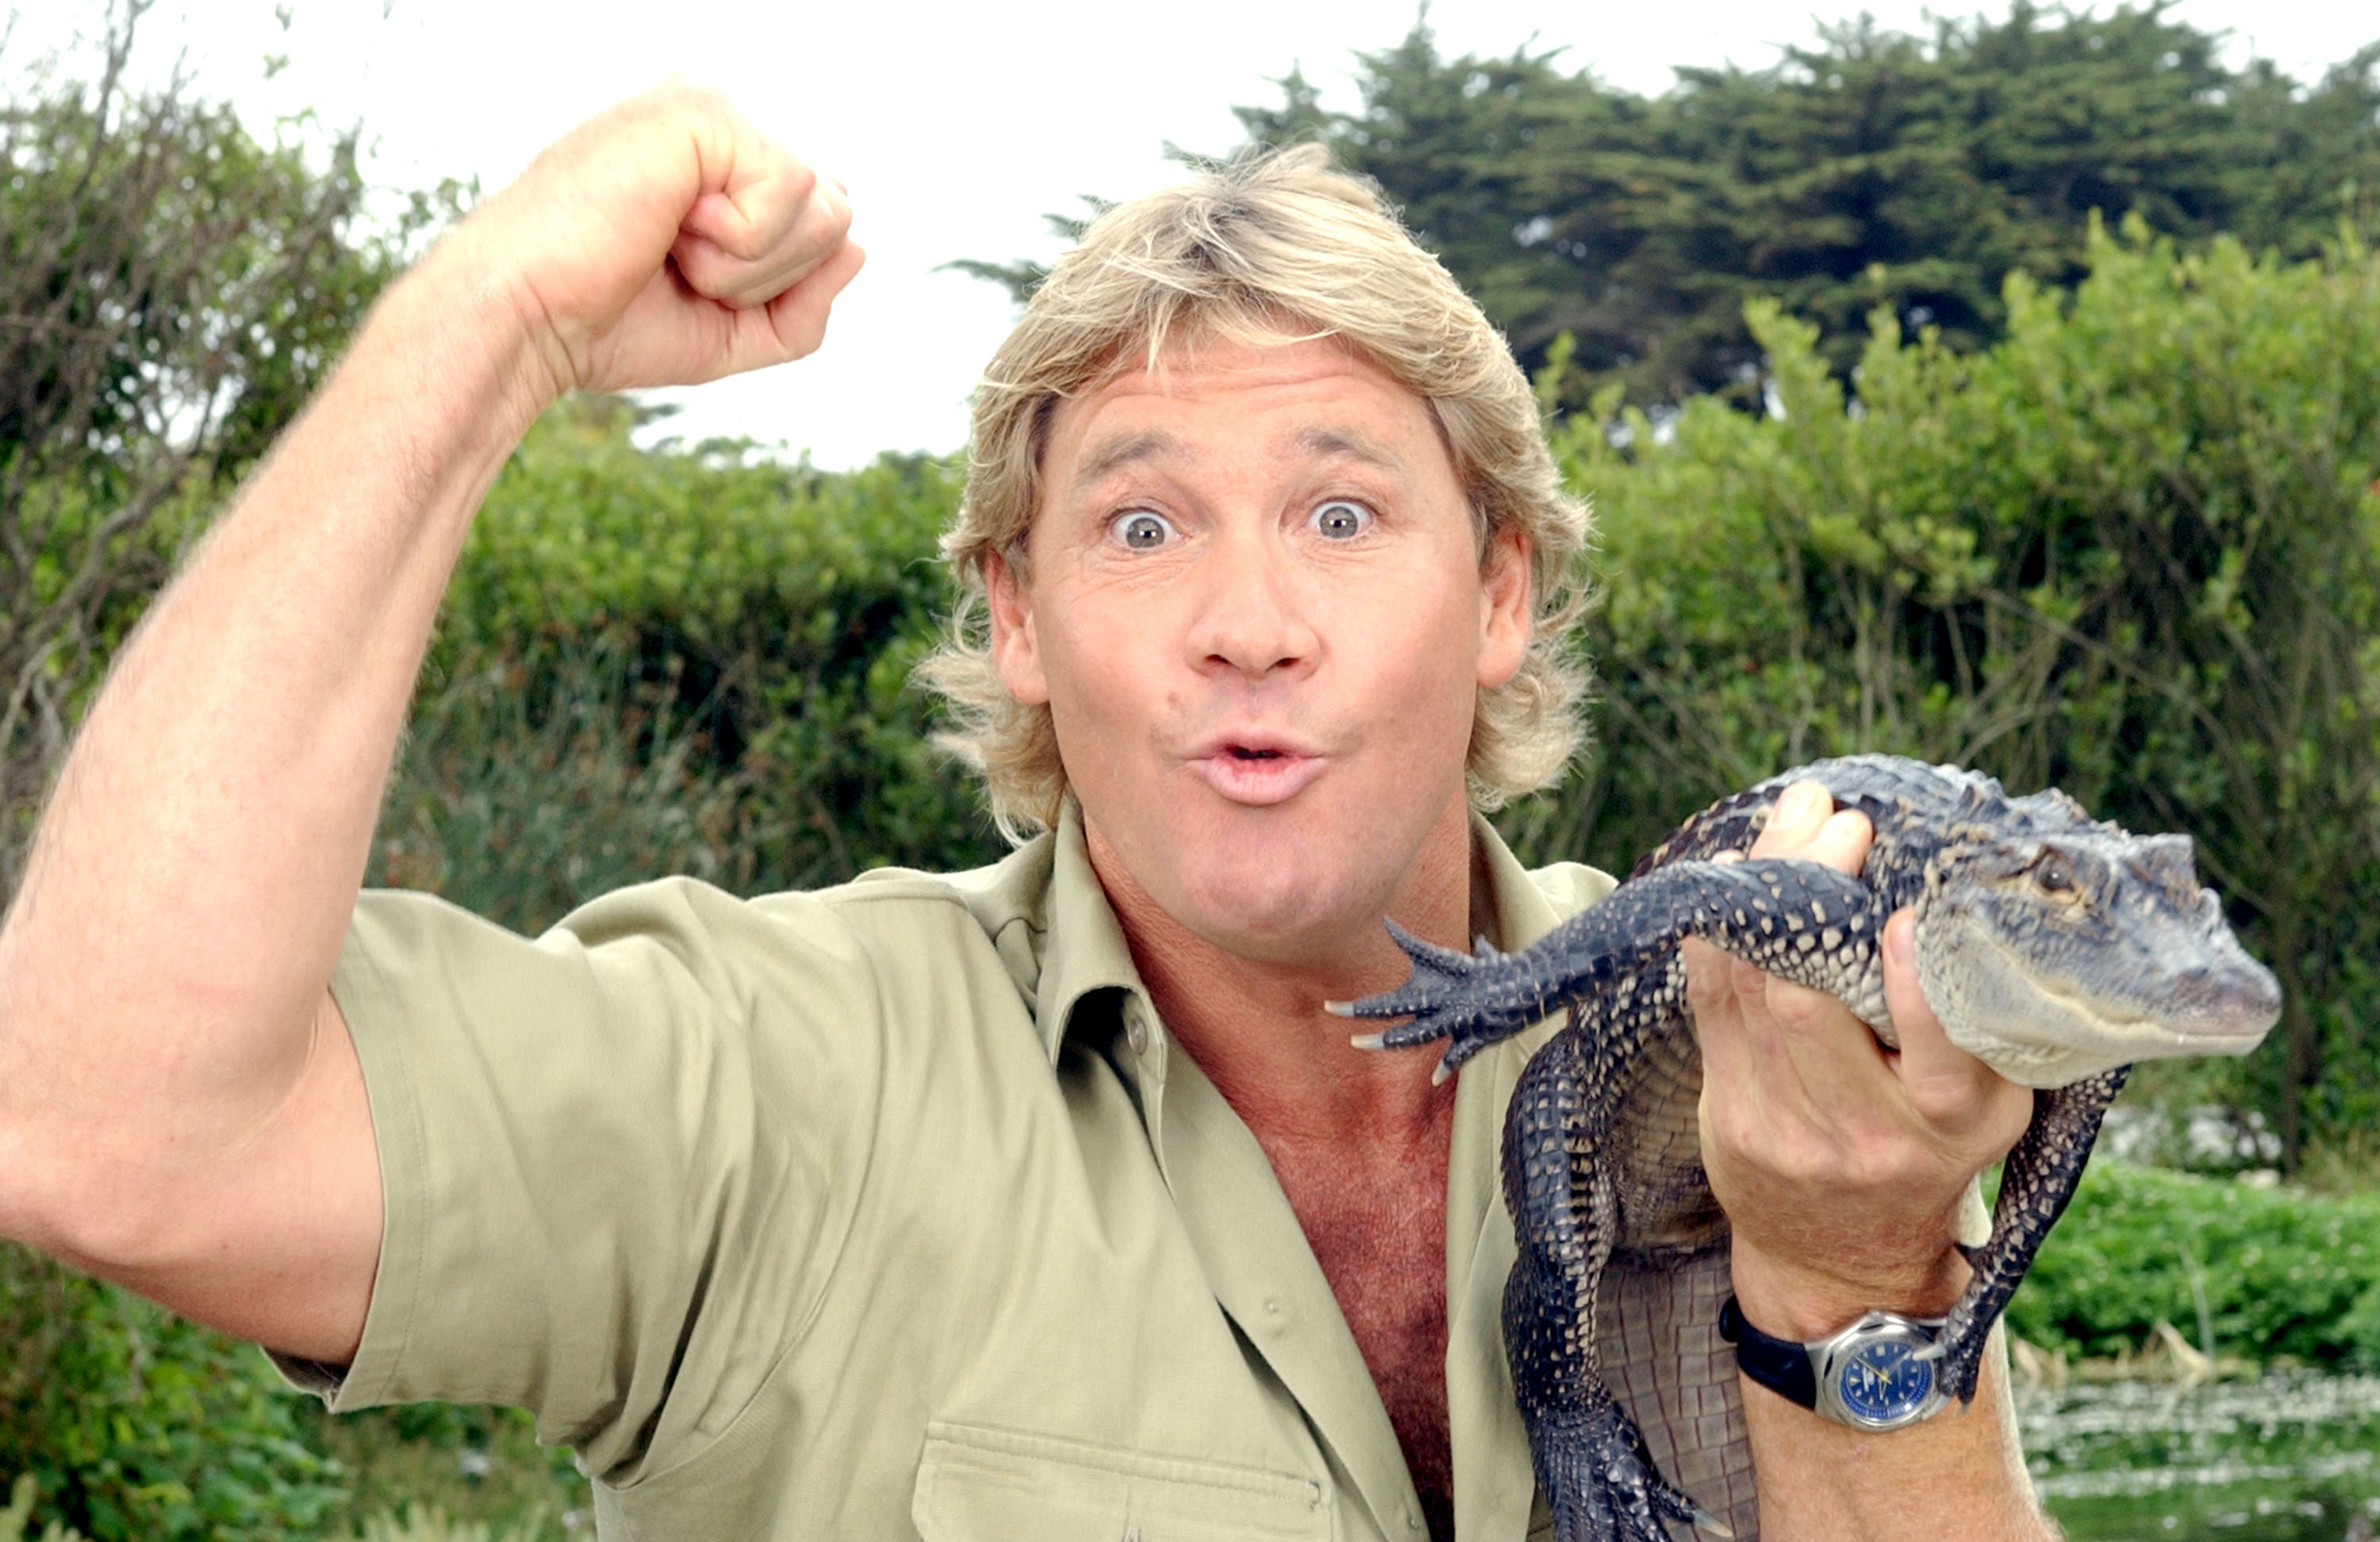 'The Crocodile Hunter', Steve Irwin, poses with a three foot long alligator at the San Francisco Zoo in San Francisco, California on June 26, 2002. (Justin Sullivan—Getty Images)